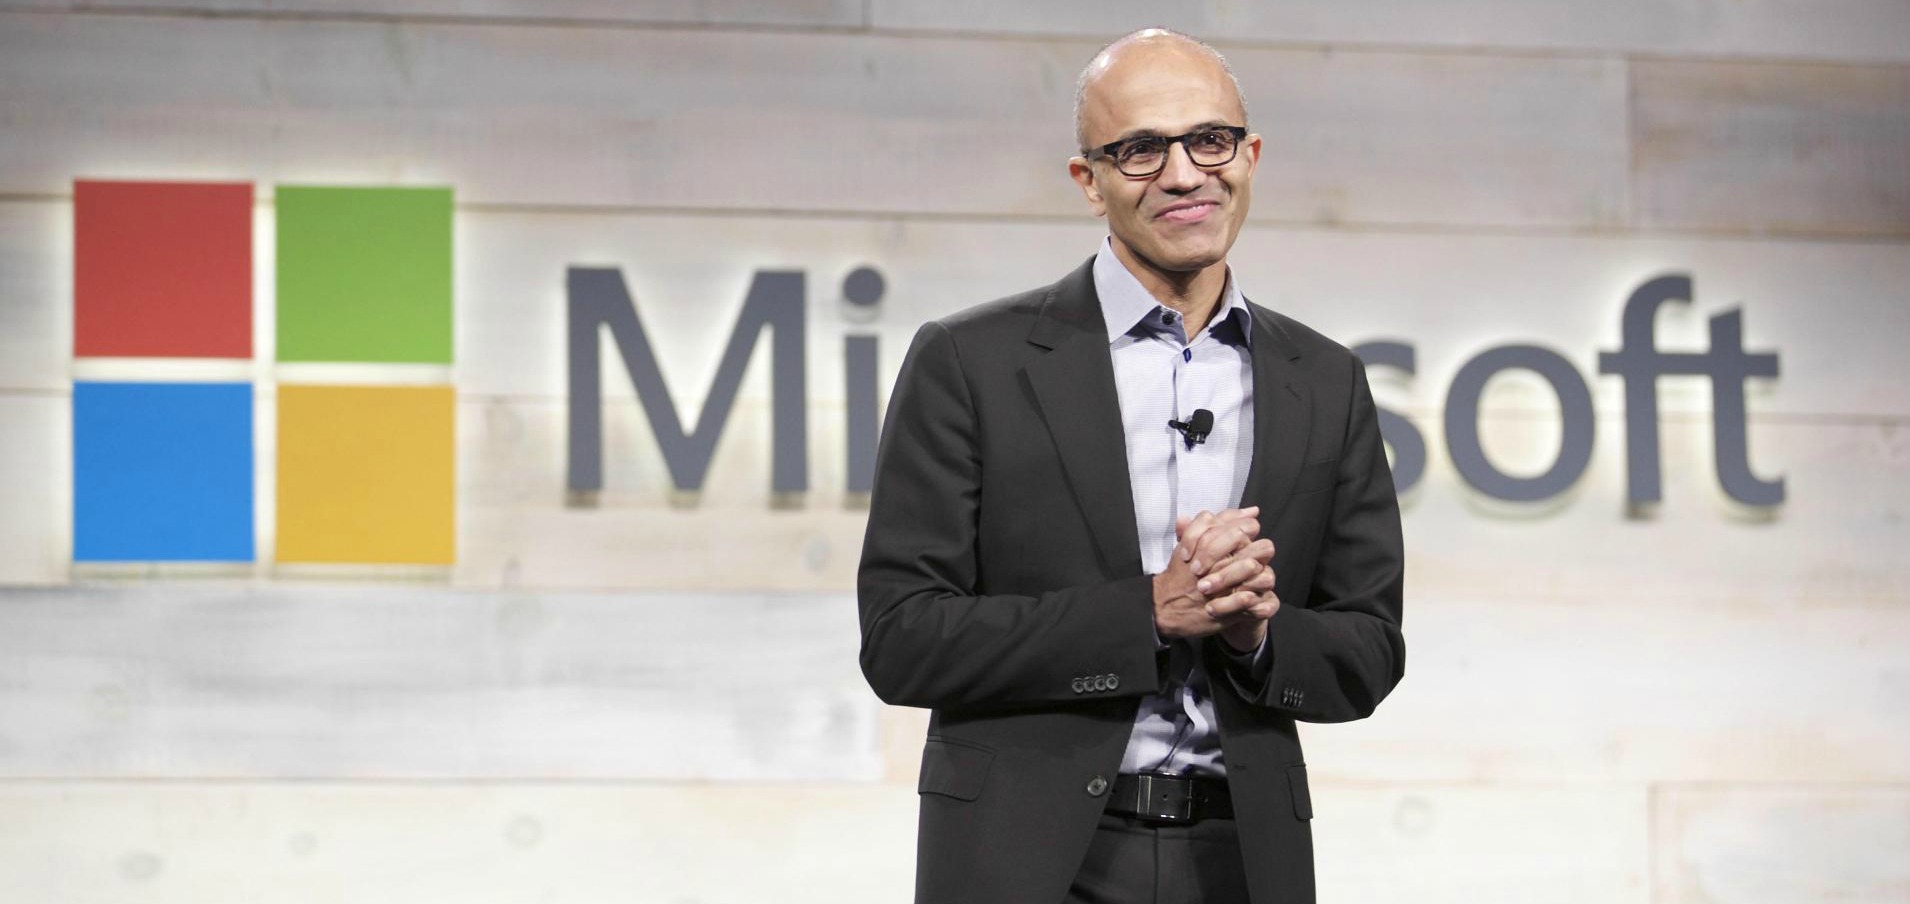 Microsoft to Lay Off 700 Jobs